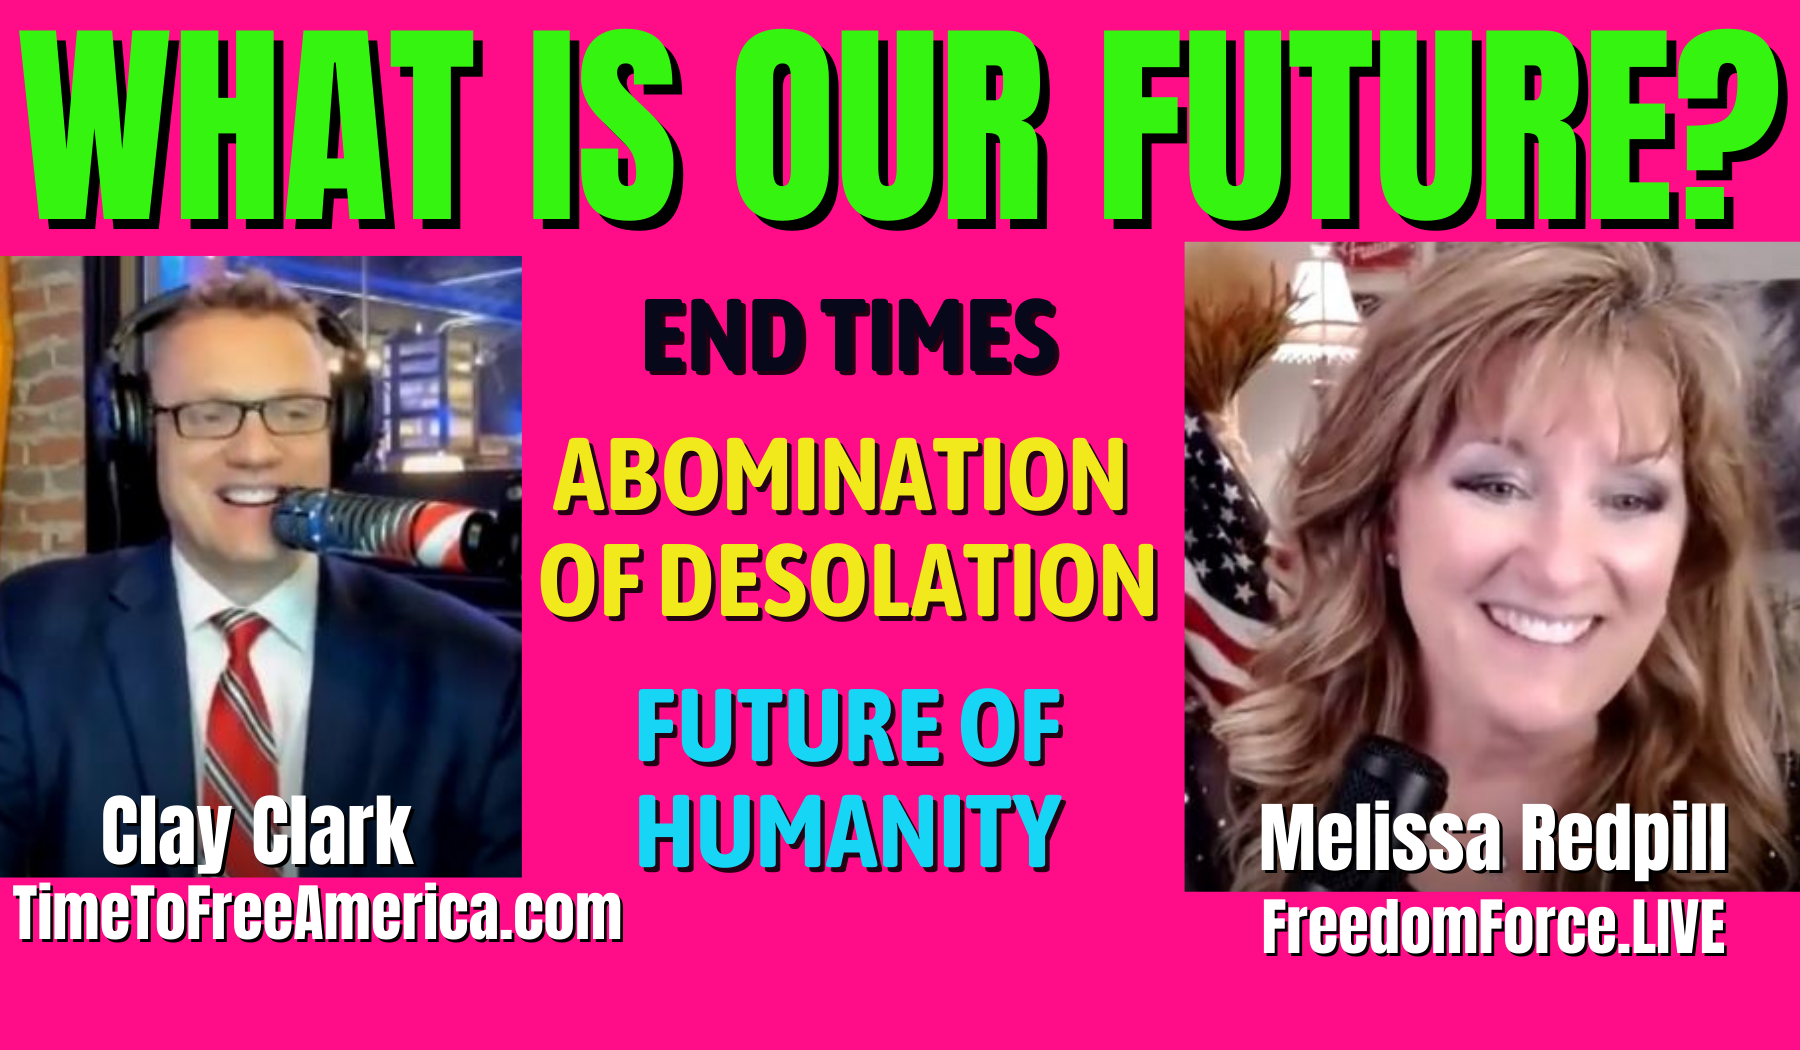 WHAT IS OUR FUTURE? CLAY CLARK AND MELISSA REDPILL – ABOMINATION OF DESOLATION 12-9-21